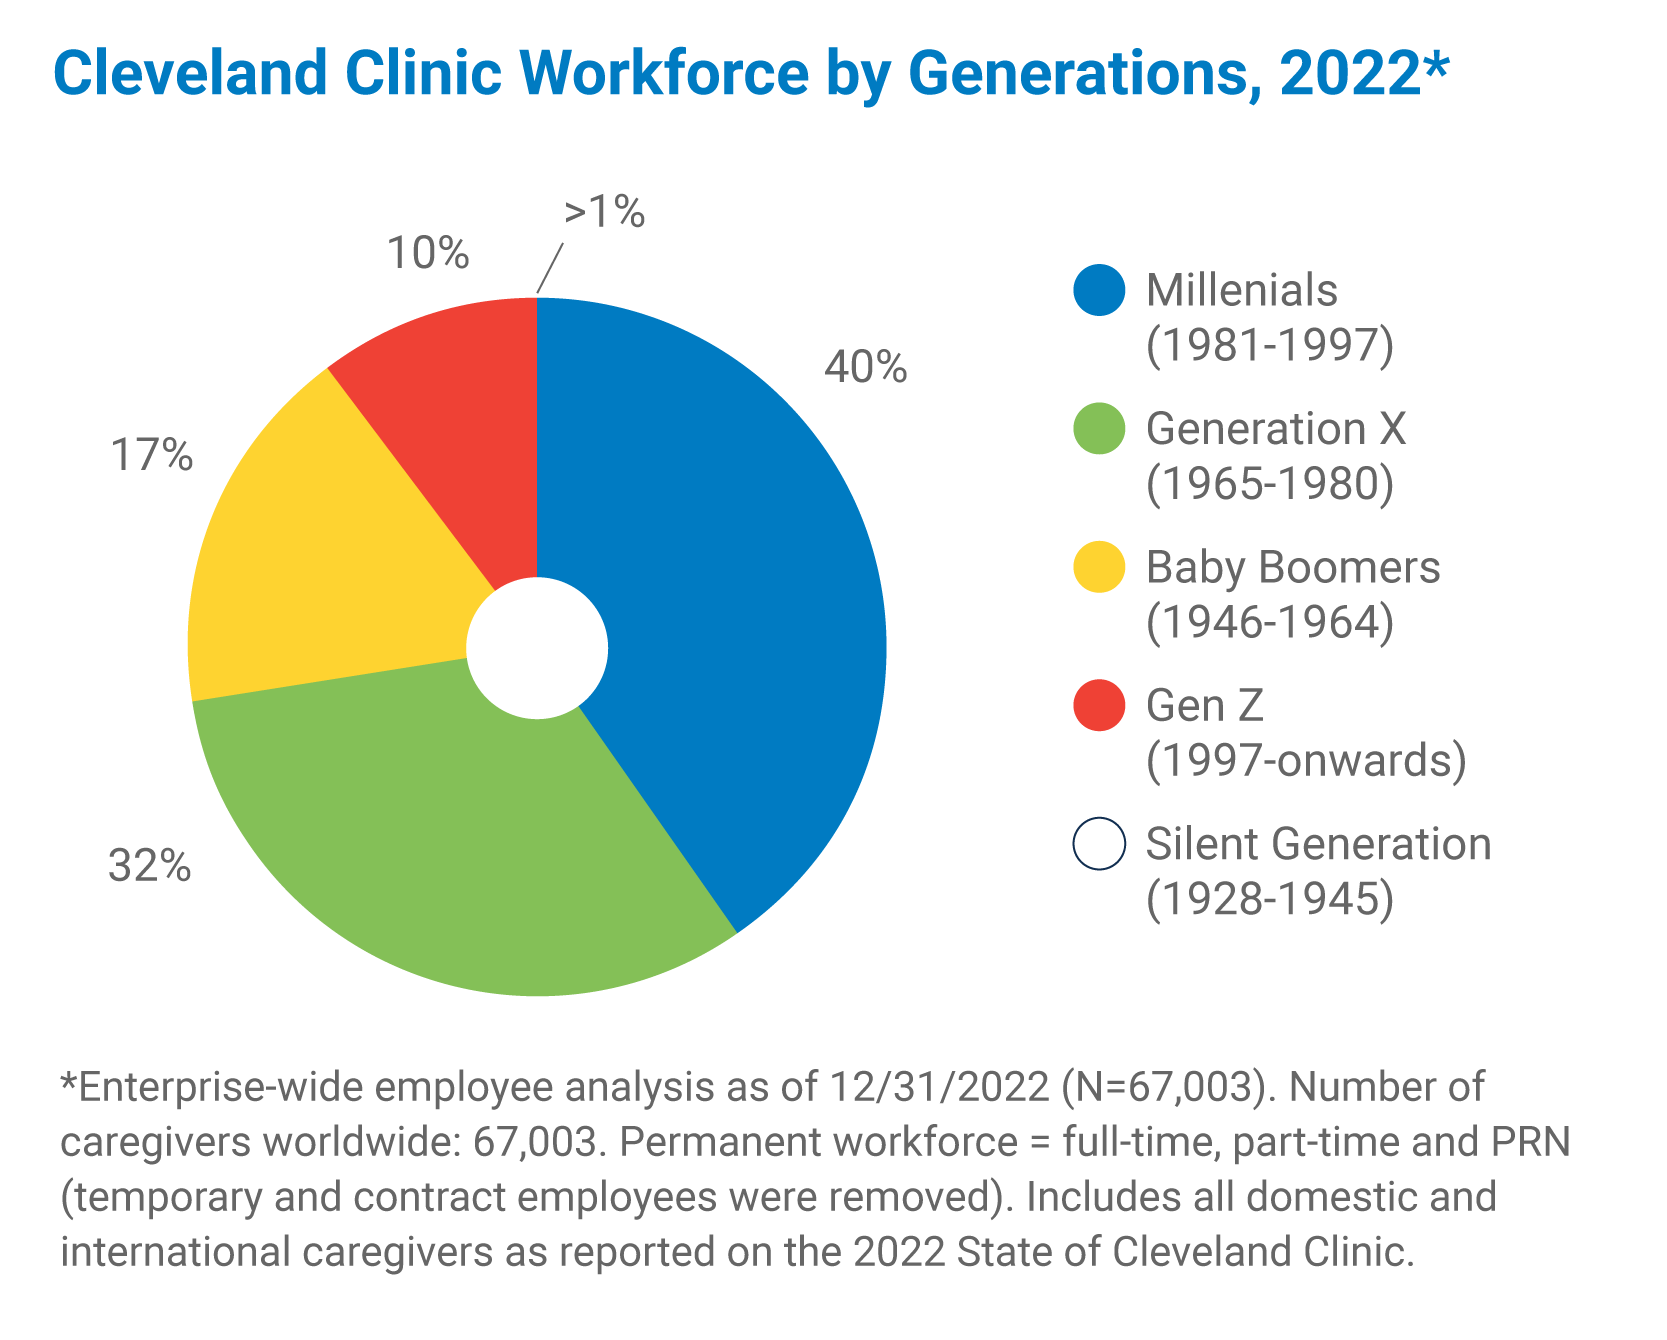 Cleveland Clinic workforce by generations 2022